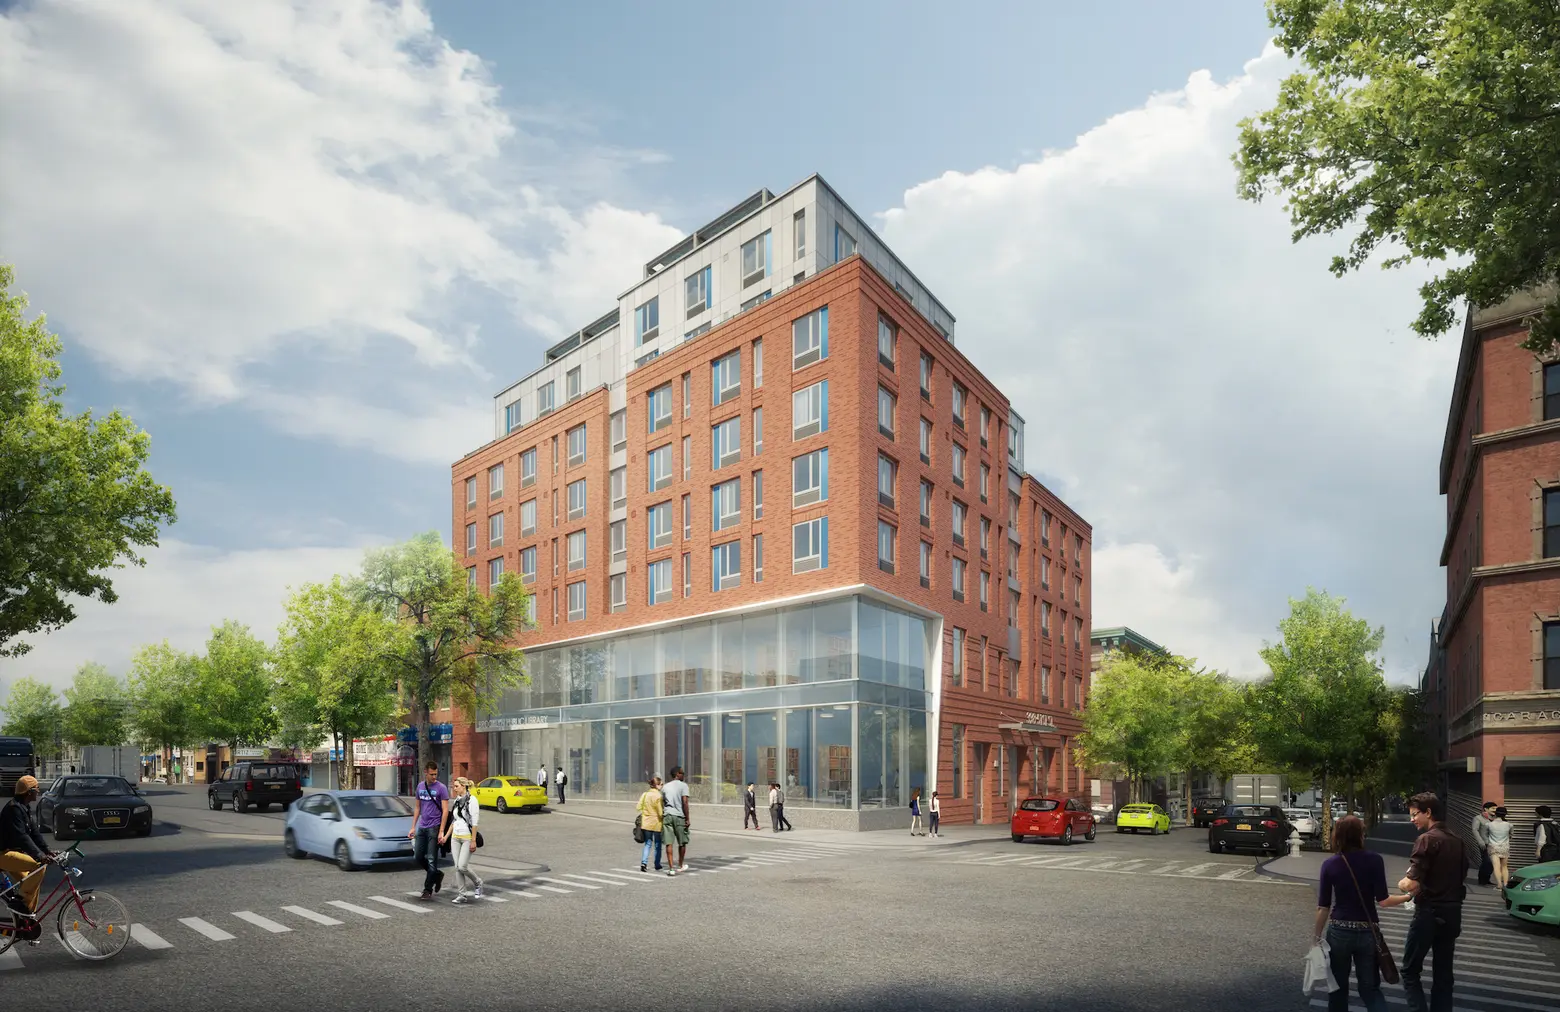 Apply for 49 affordable apartments above a new library in Sunset Park, from $524/month